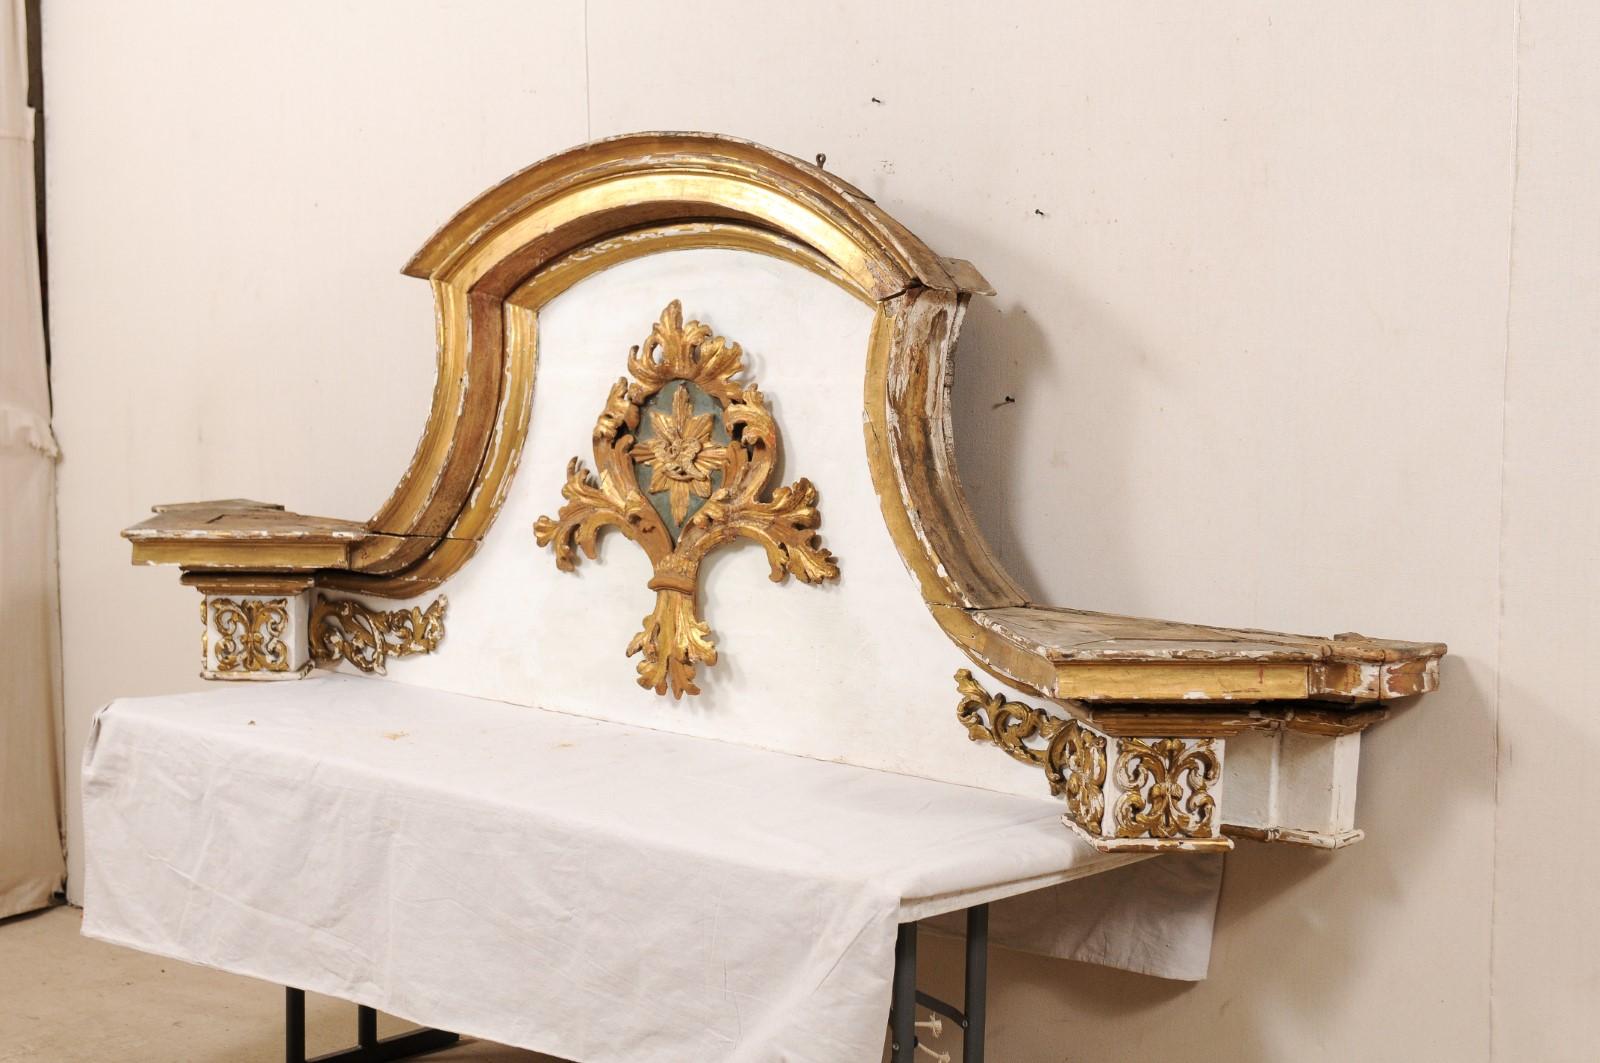 Impressive 18th Century Italian Carved, Gilded & Painted Wood Pediment Fragment For Sale 2